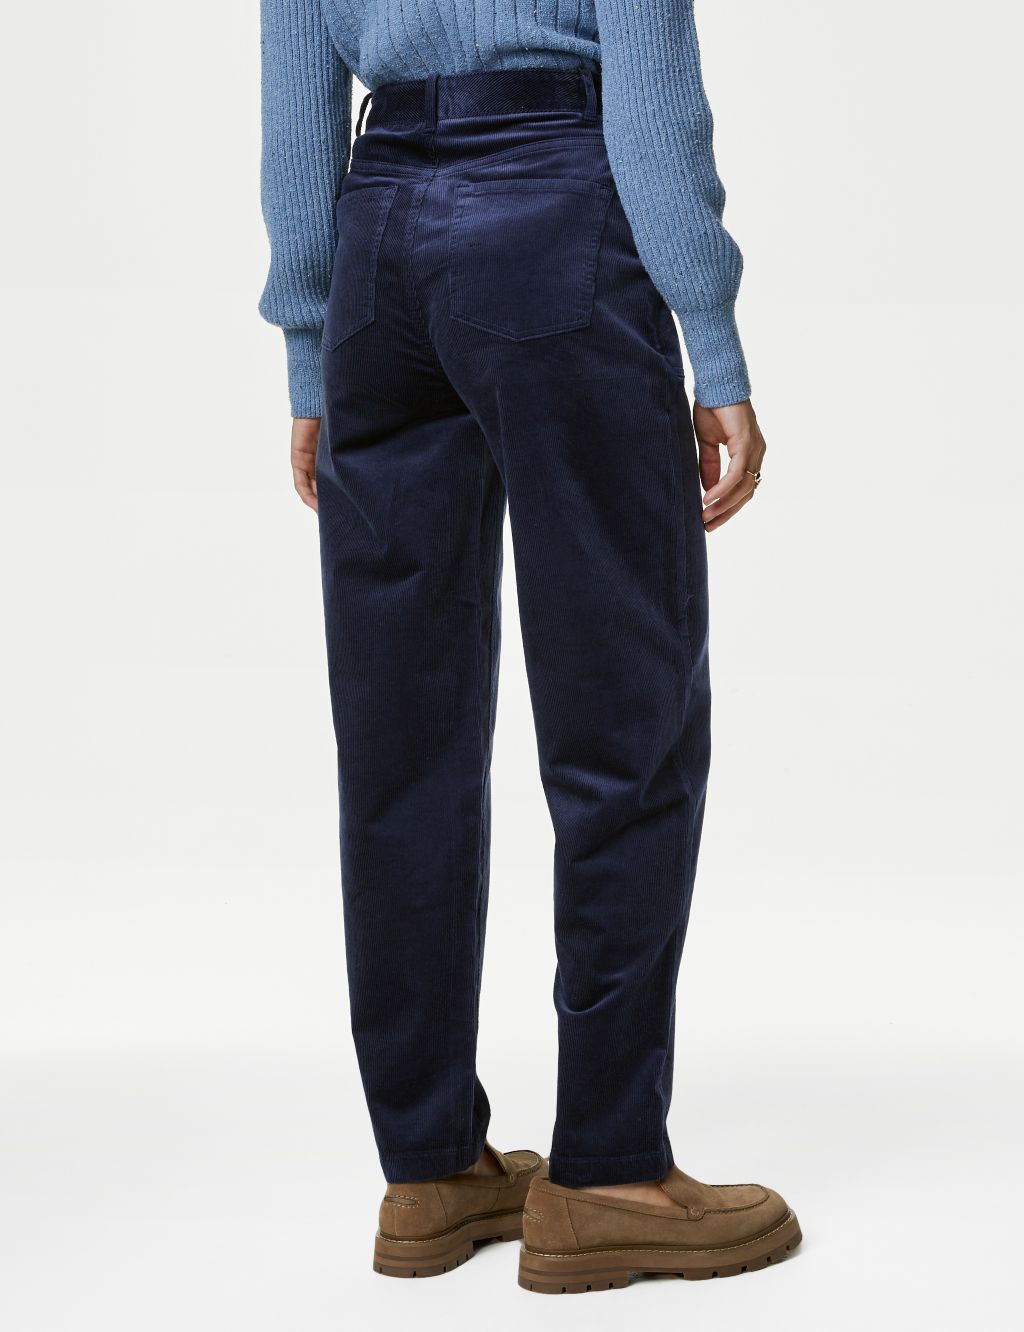 Corduroy Tapered Ankle Grazer Trousers image 5